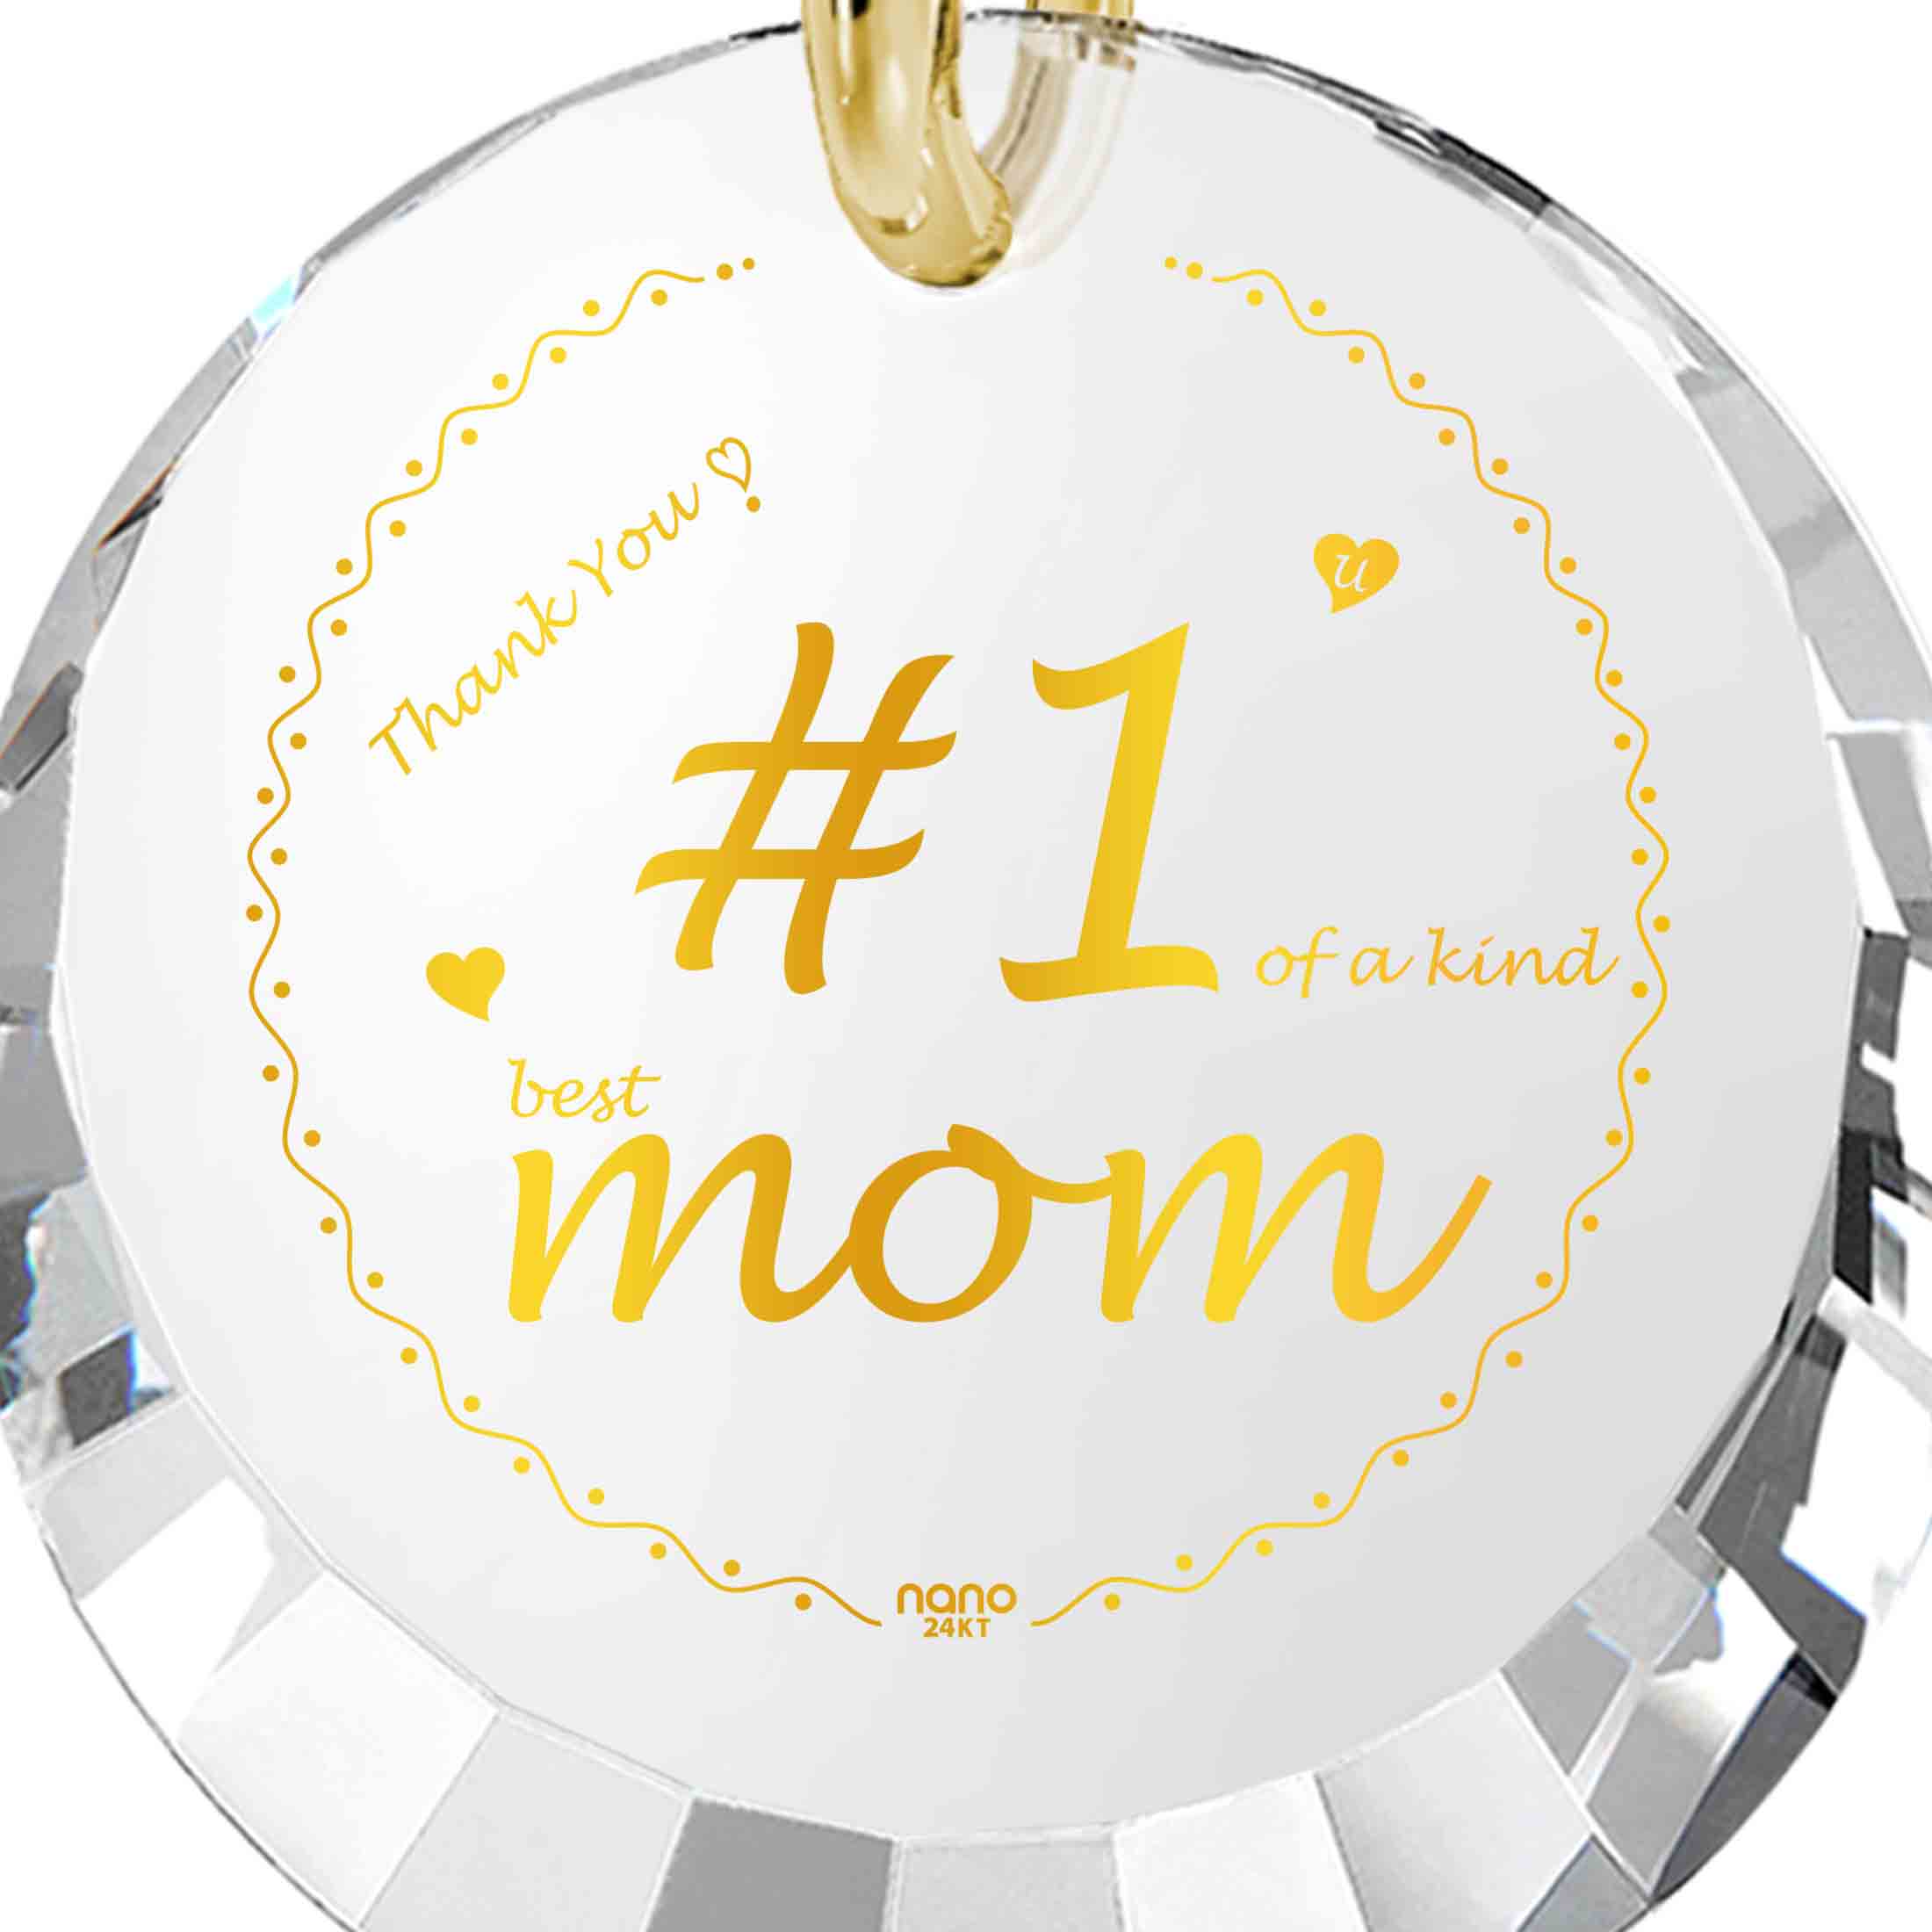 Round pendant with "Number One Mom" in gold script on a black background, encircled by a golden dotted line and decorative hearts, making it a unique gift.